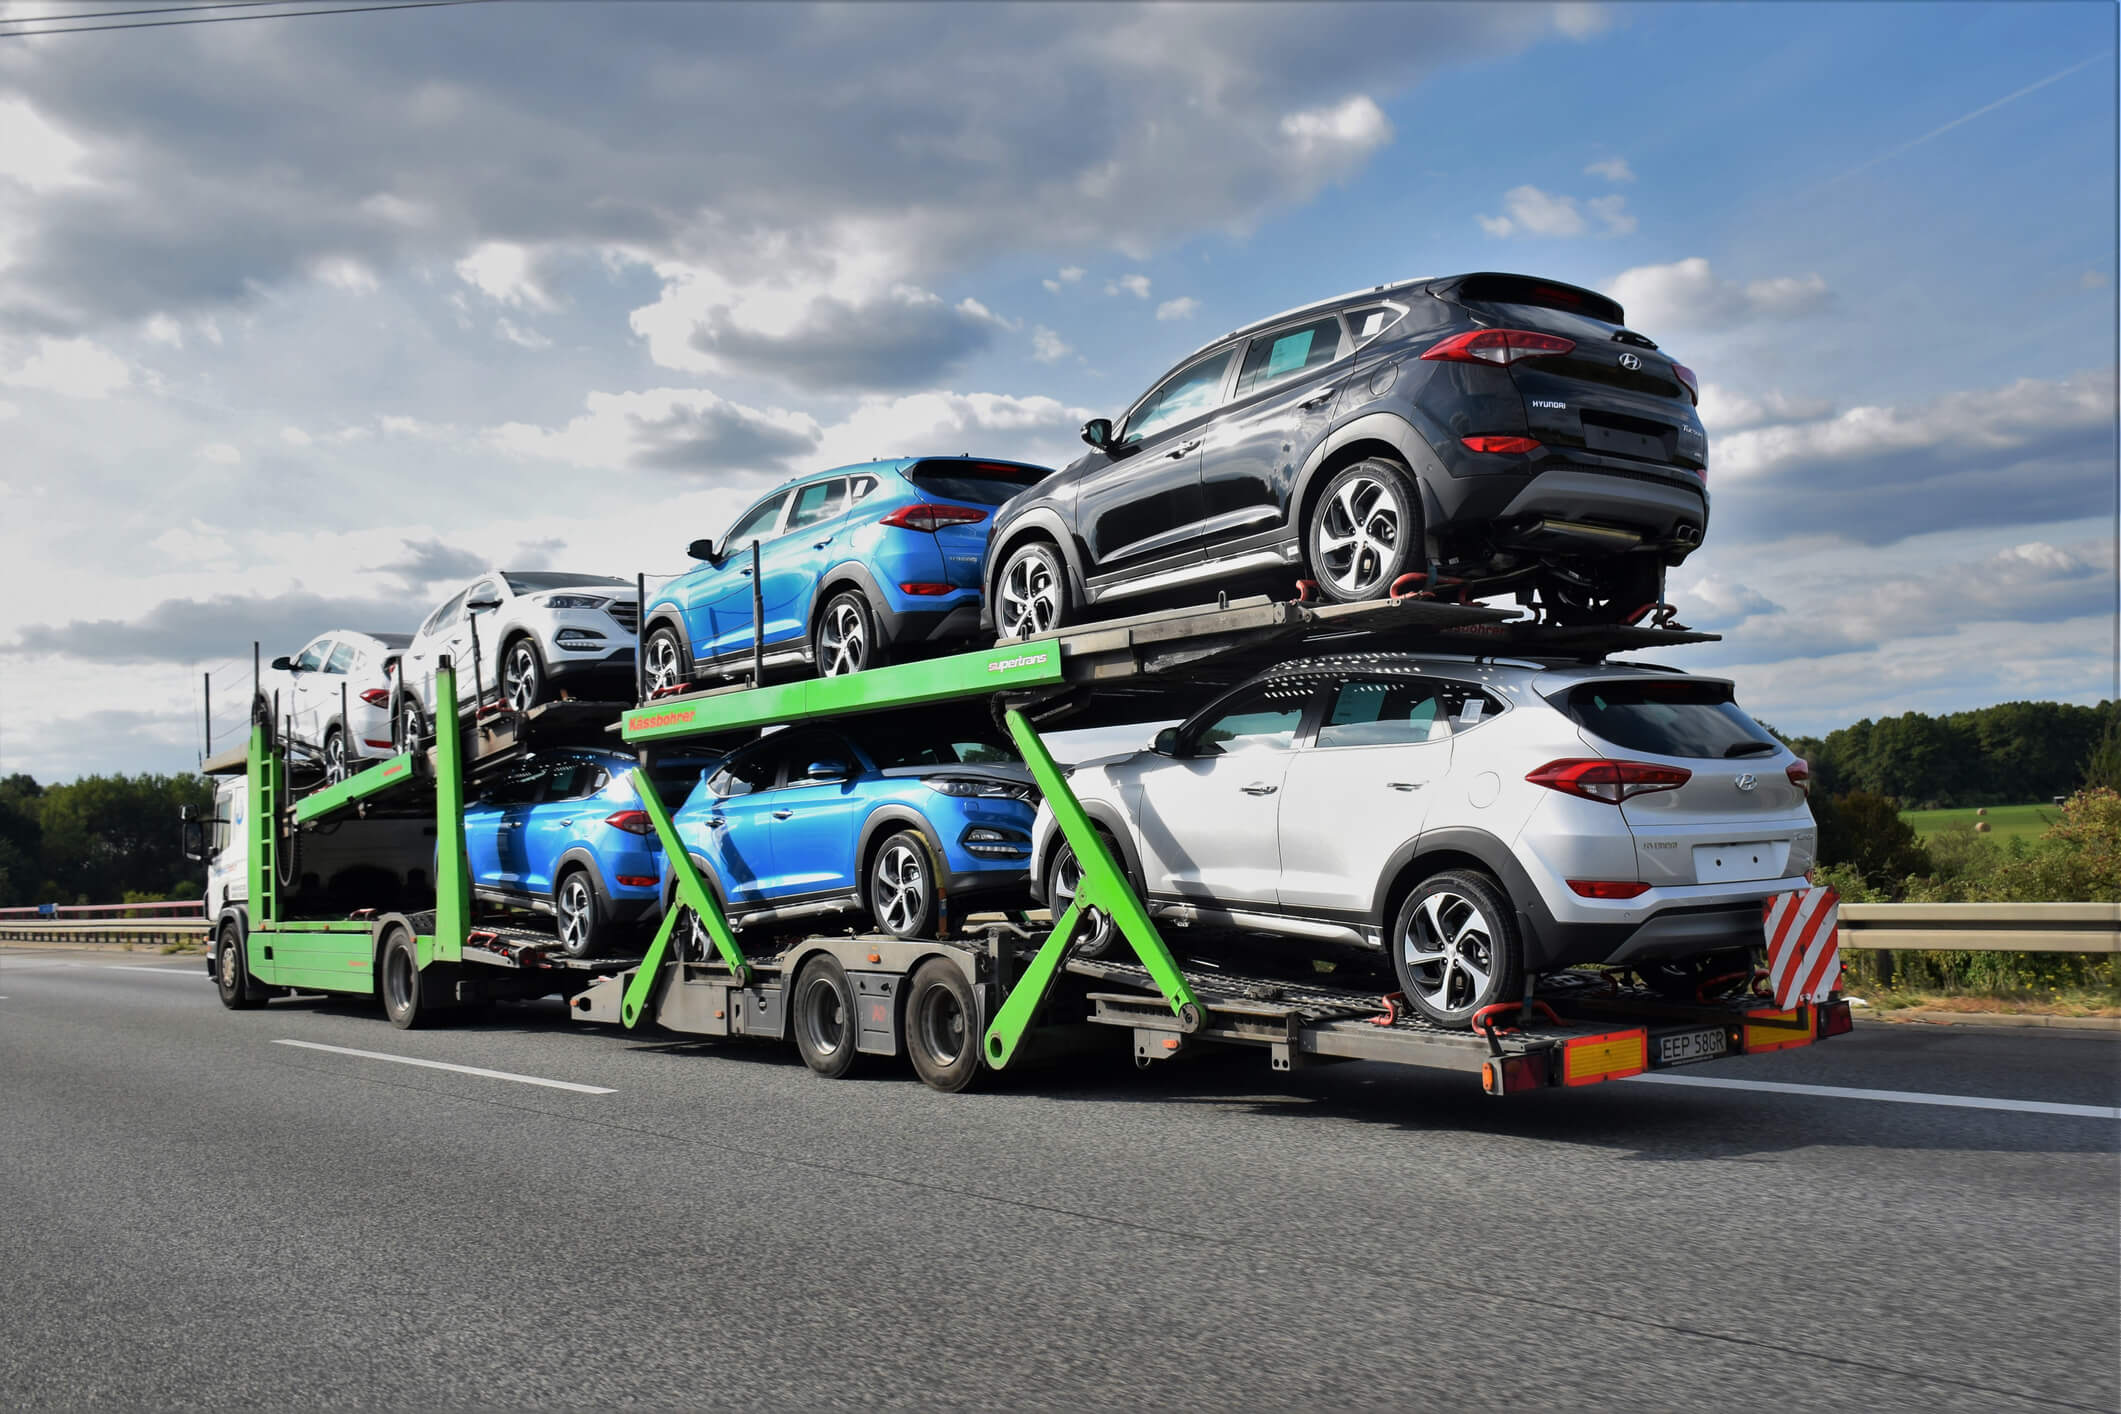 Cars being transported on a double deck trailer